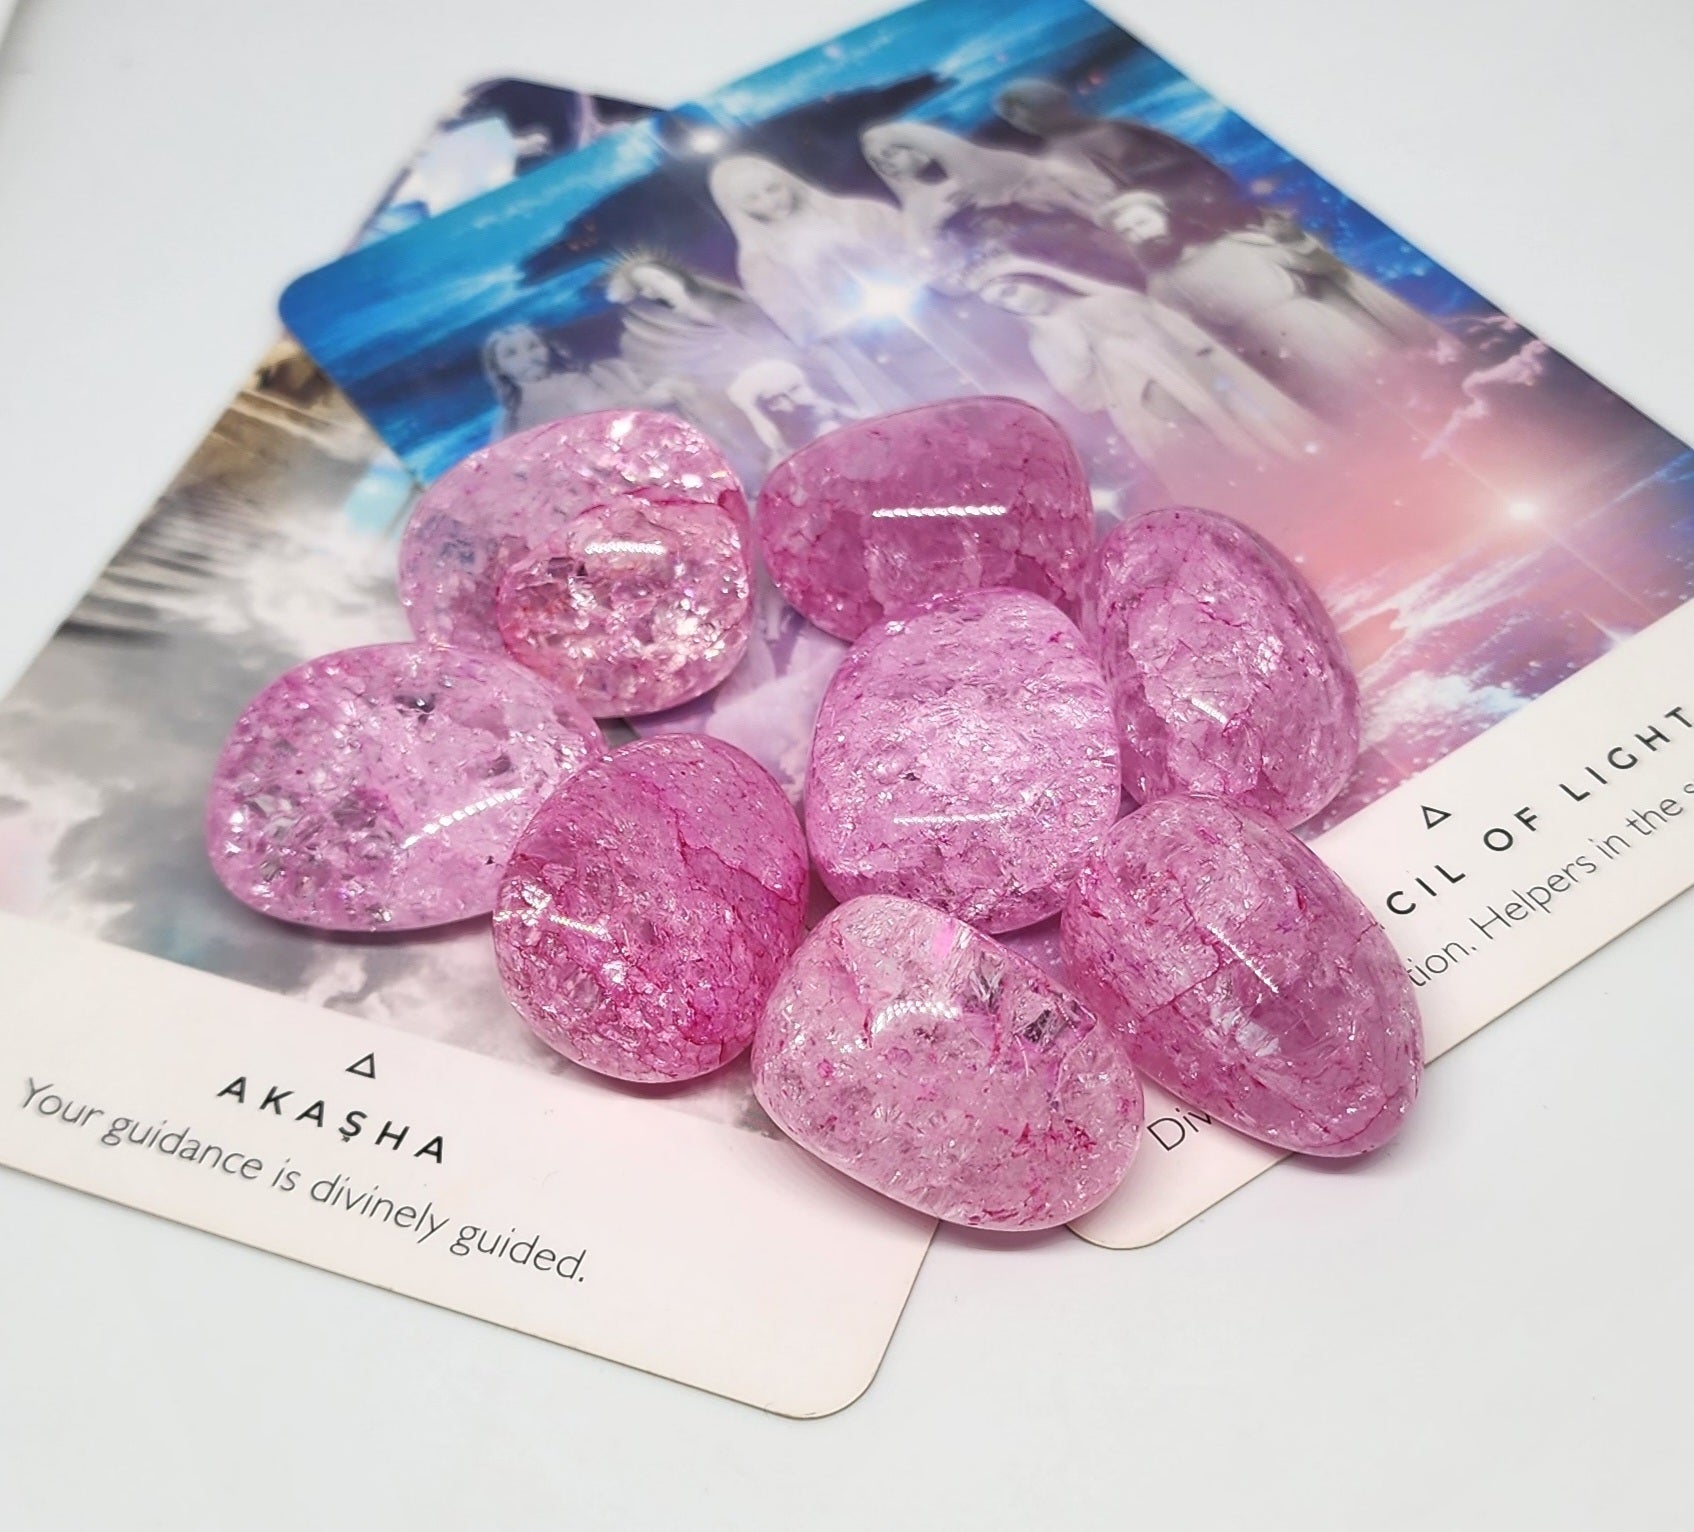 Pink crystal for heart chakra sold at crystal store Mind Soul Sync near Sydney Austrlia.